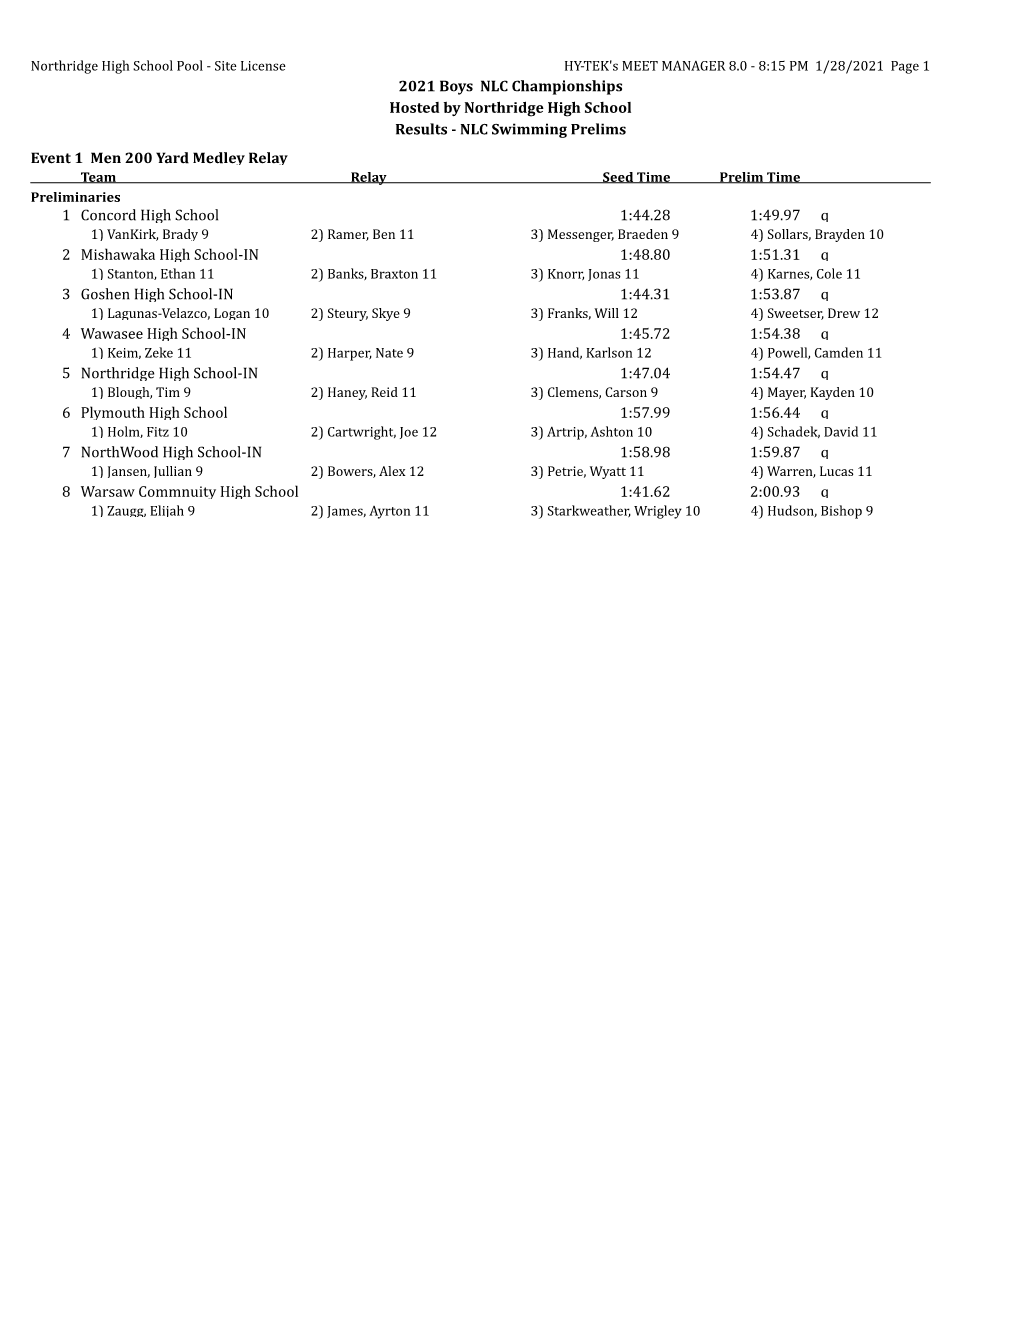 2021 Boys NLC Championships Hosted by Northridge High School Results - NLC Swimming Prelims